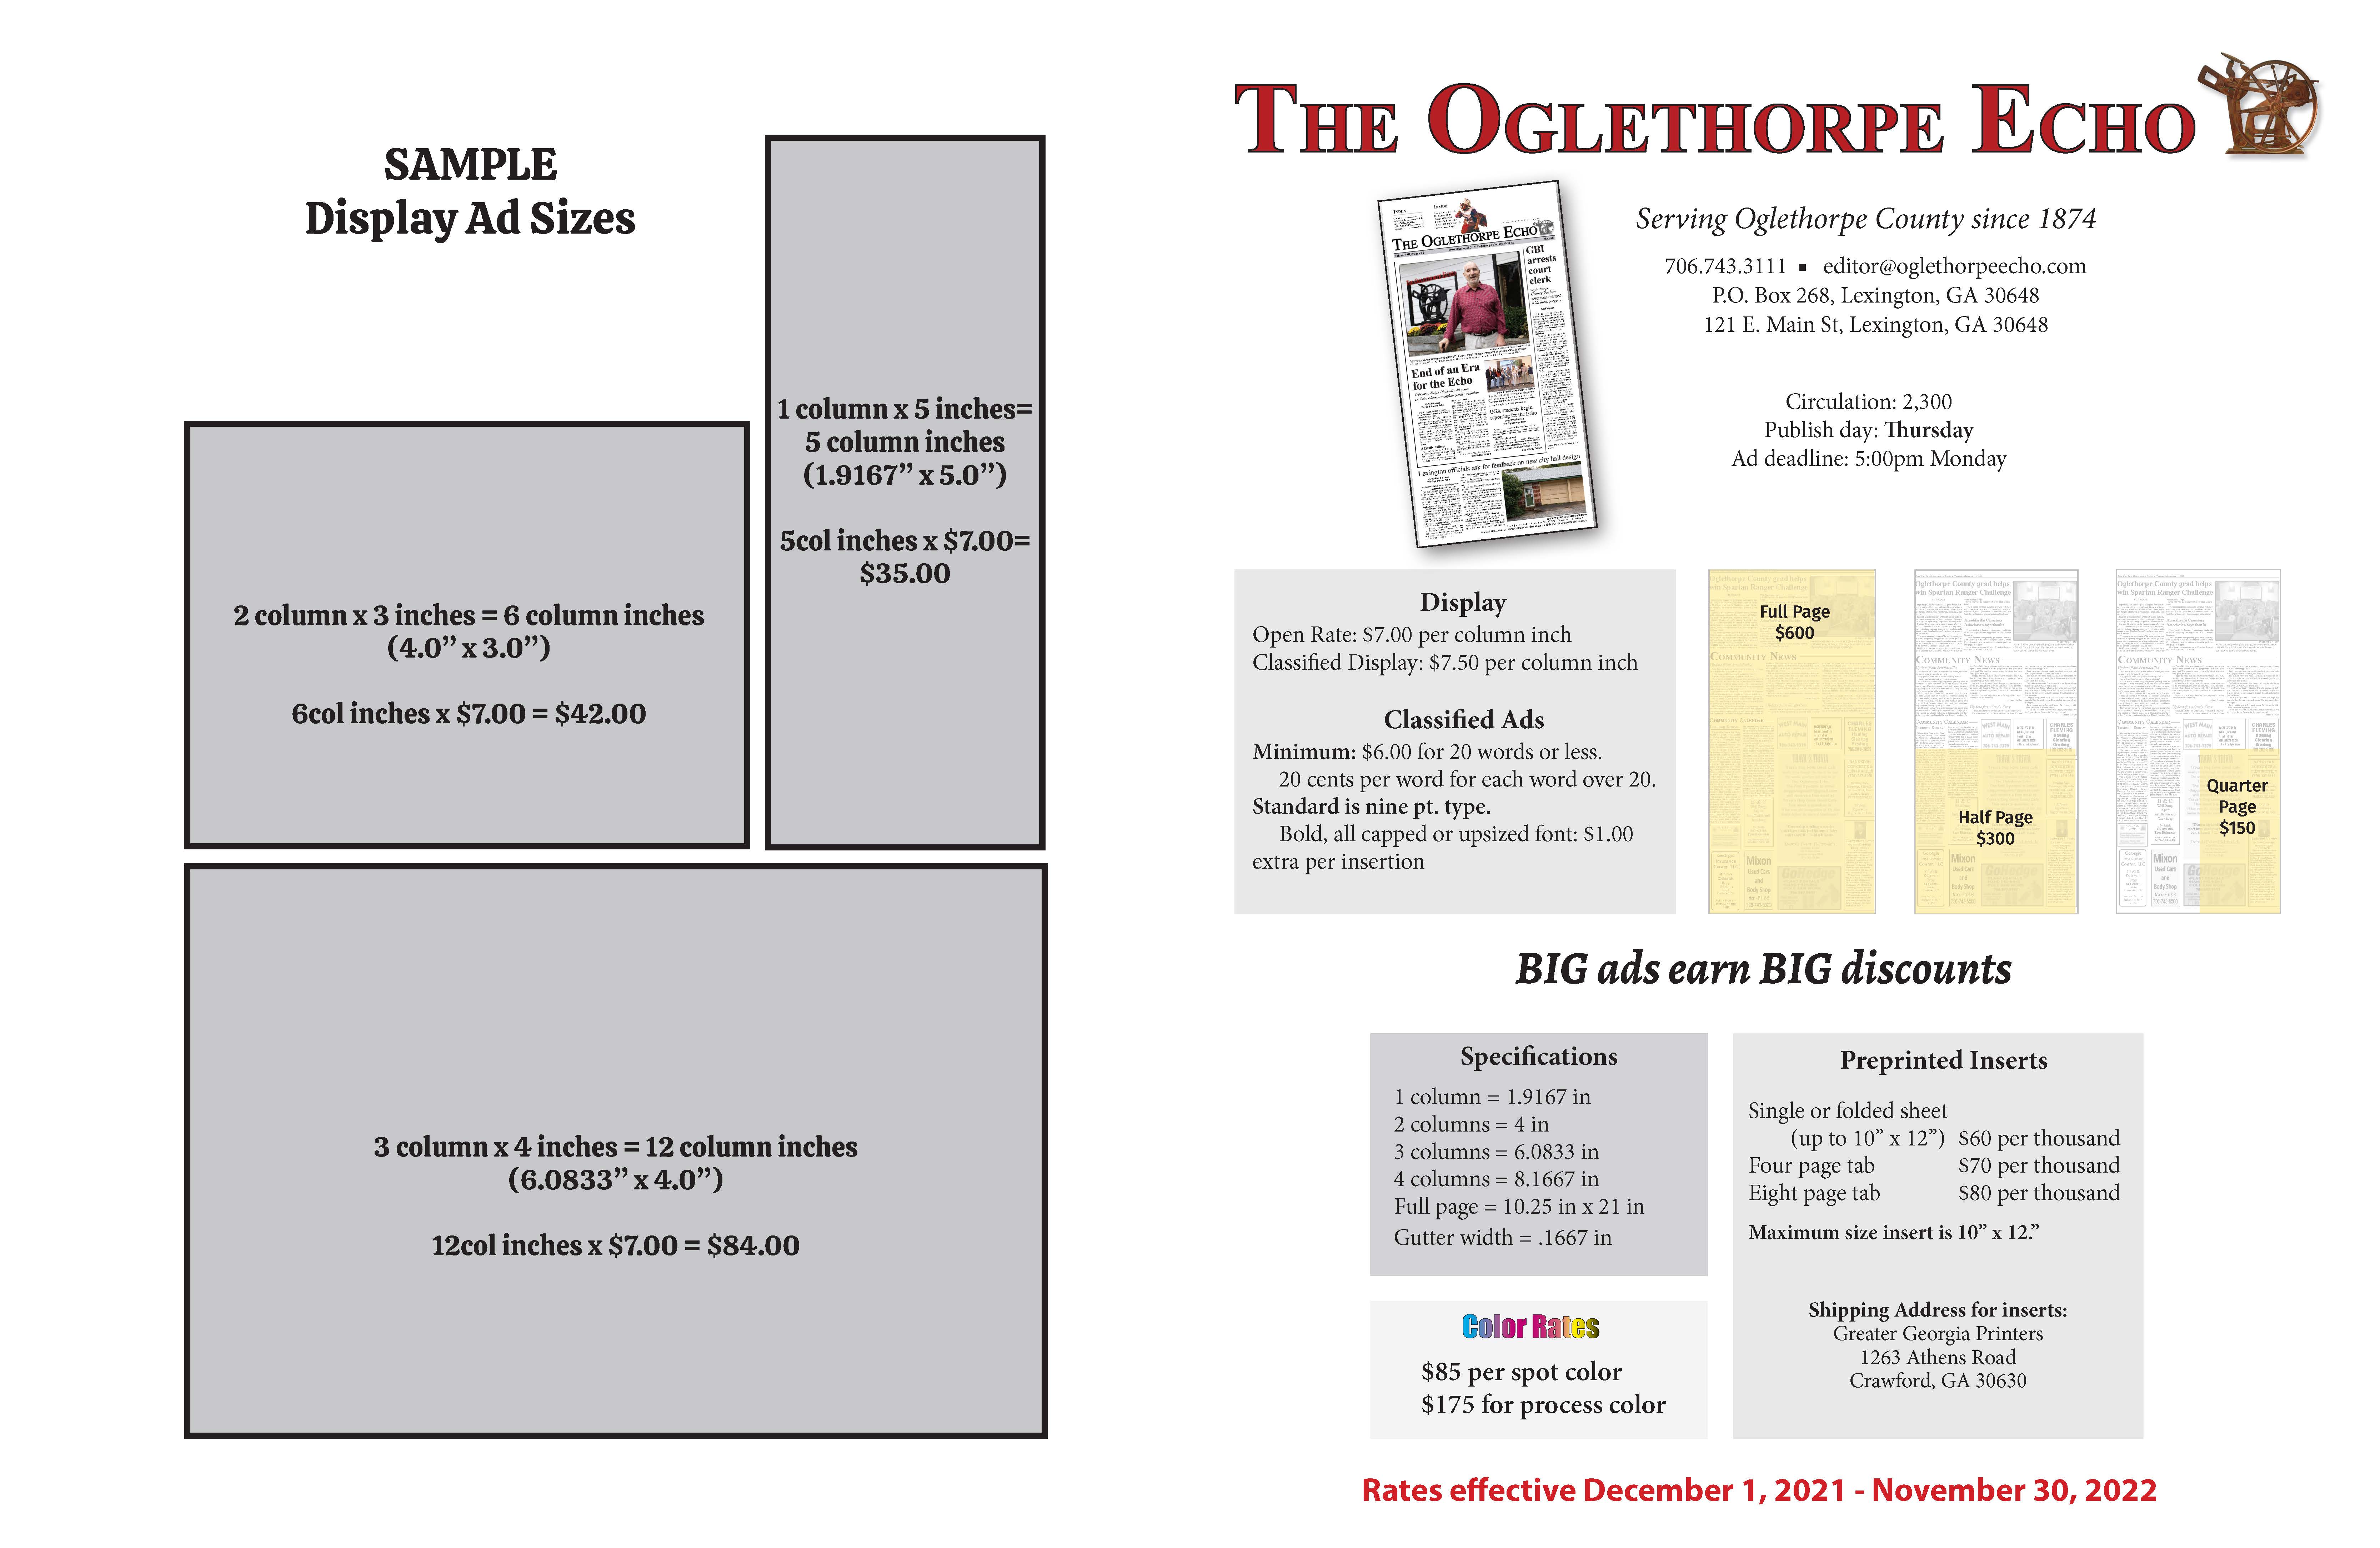 The Oglethorpe Echo rate card Page 2